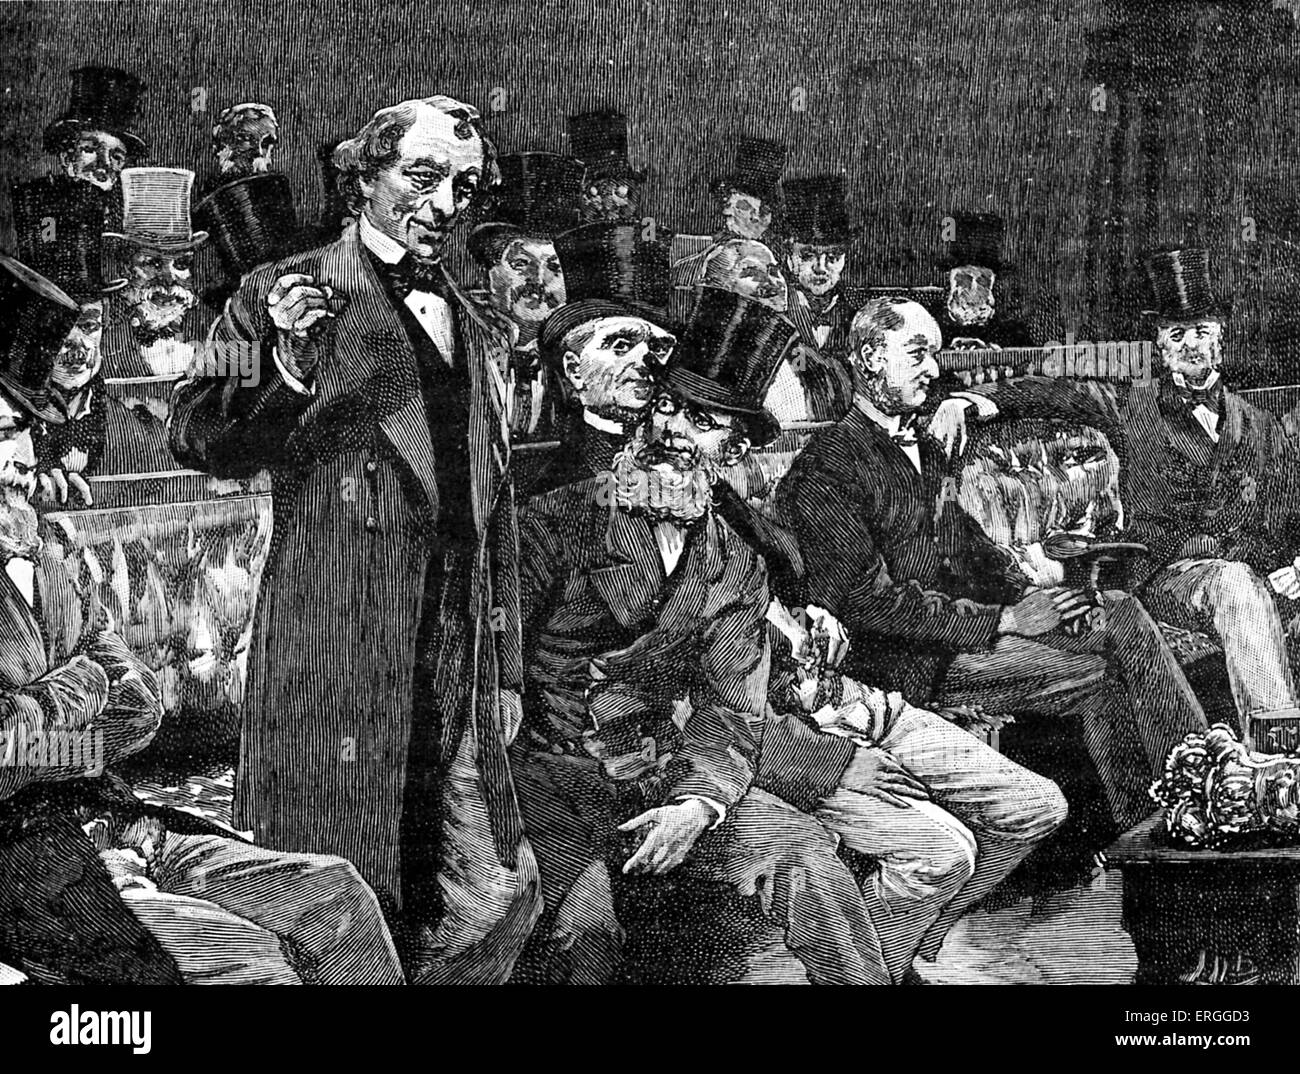 Mr Disraeli telling the House of Commons about 'dry champagne' in 1873. Benjamin Disraeli - Earl of Beaconsfield. British Stock Photo